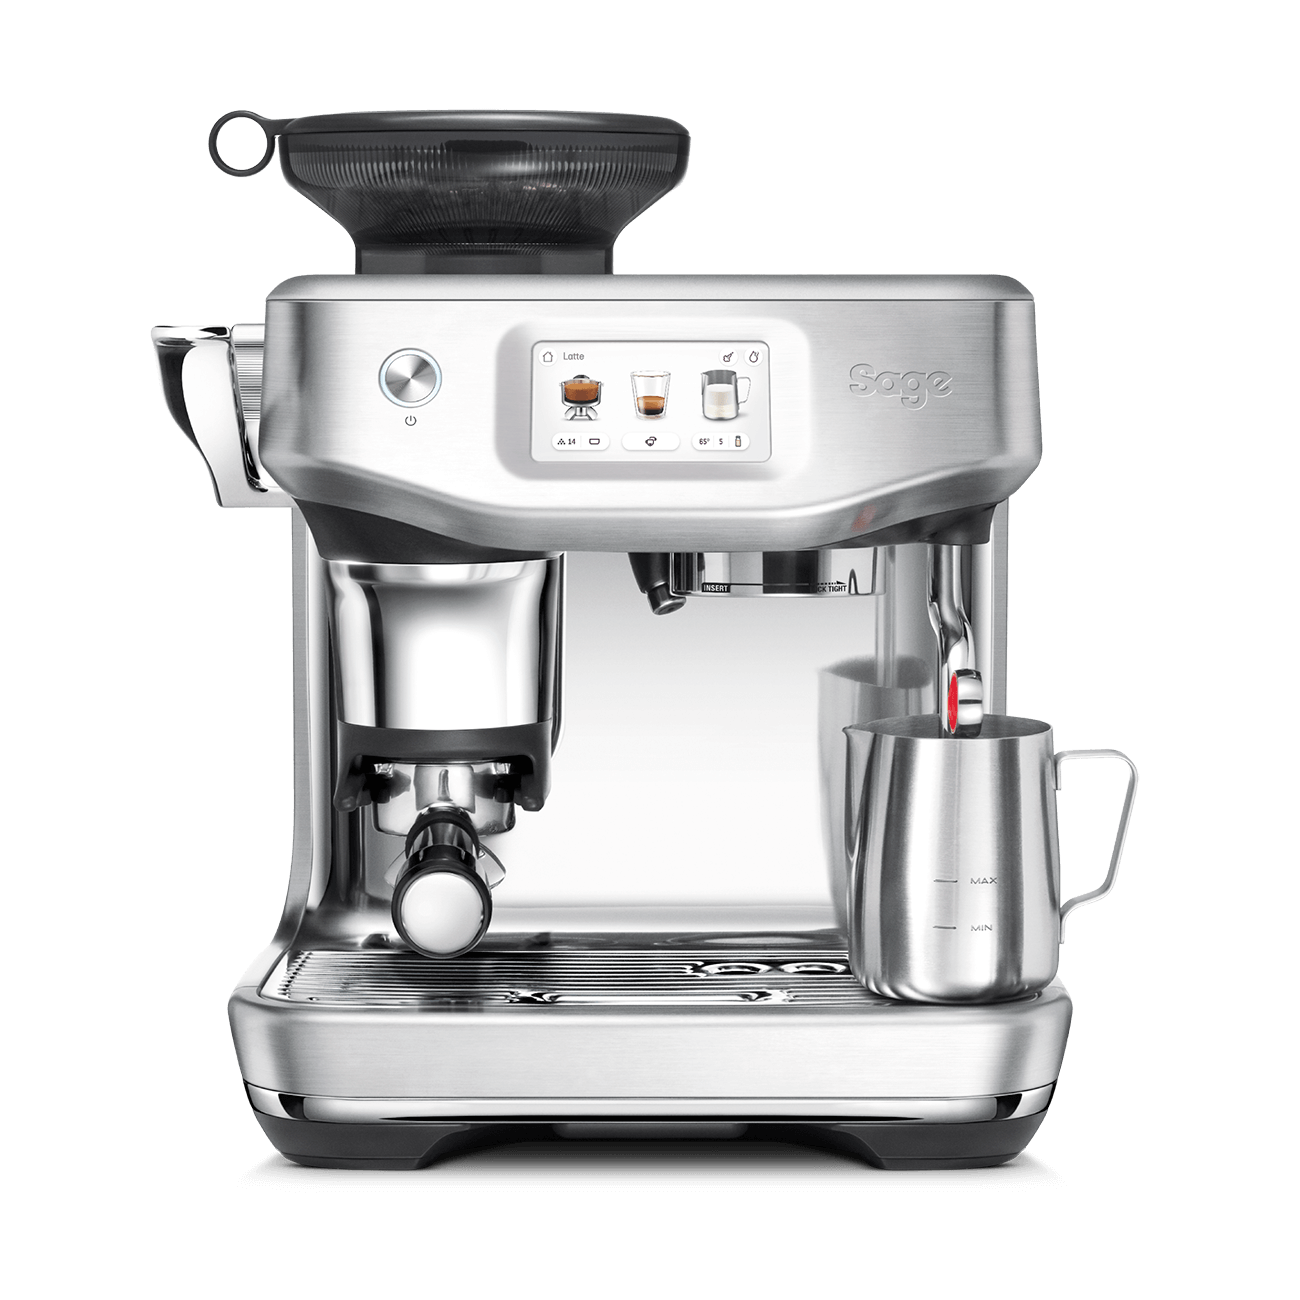 Sage The Barista Express Impress, Stainless Steel